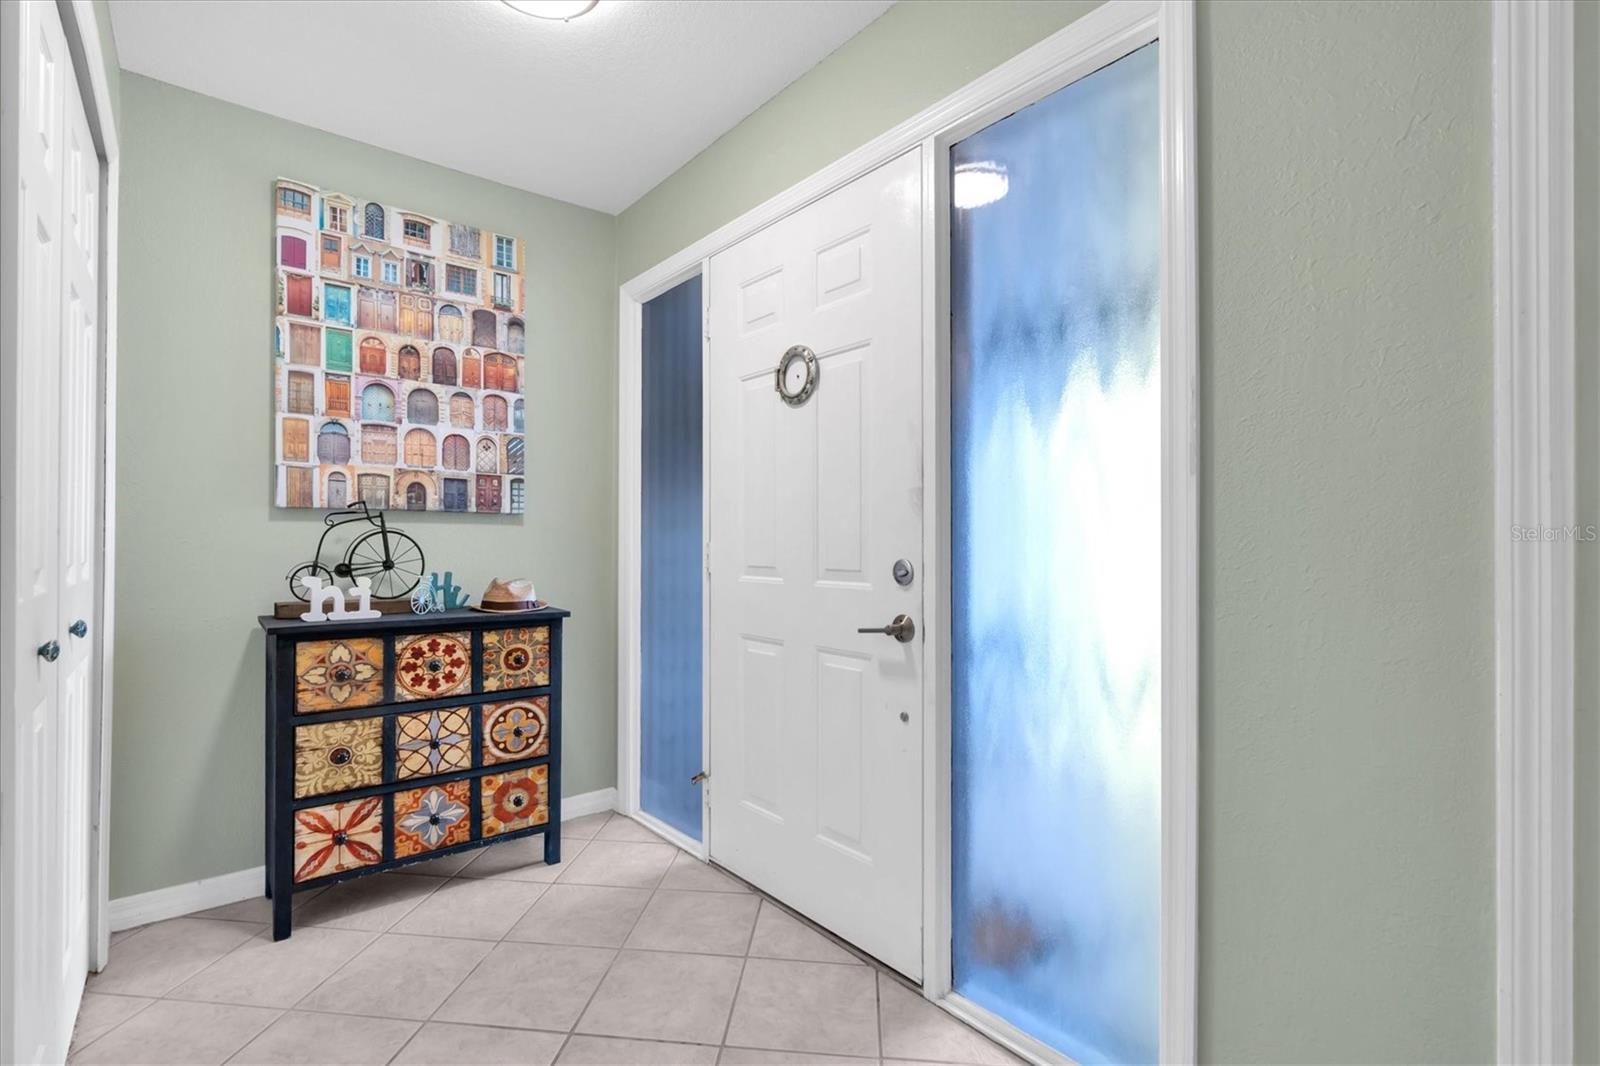 Entrance area with plenty of natural light and closet space.